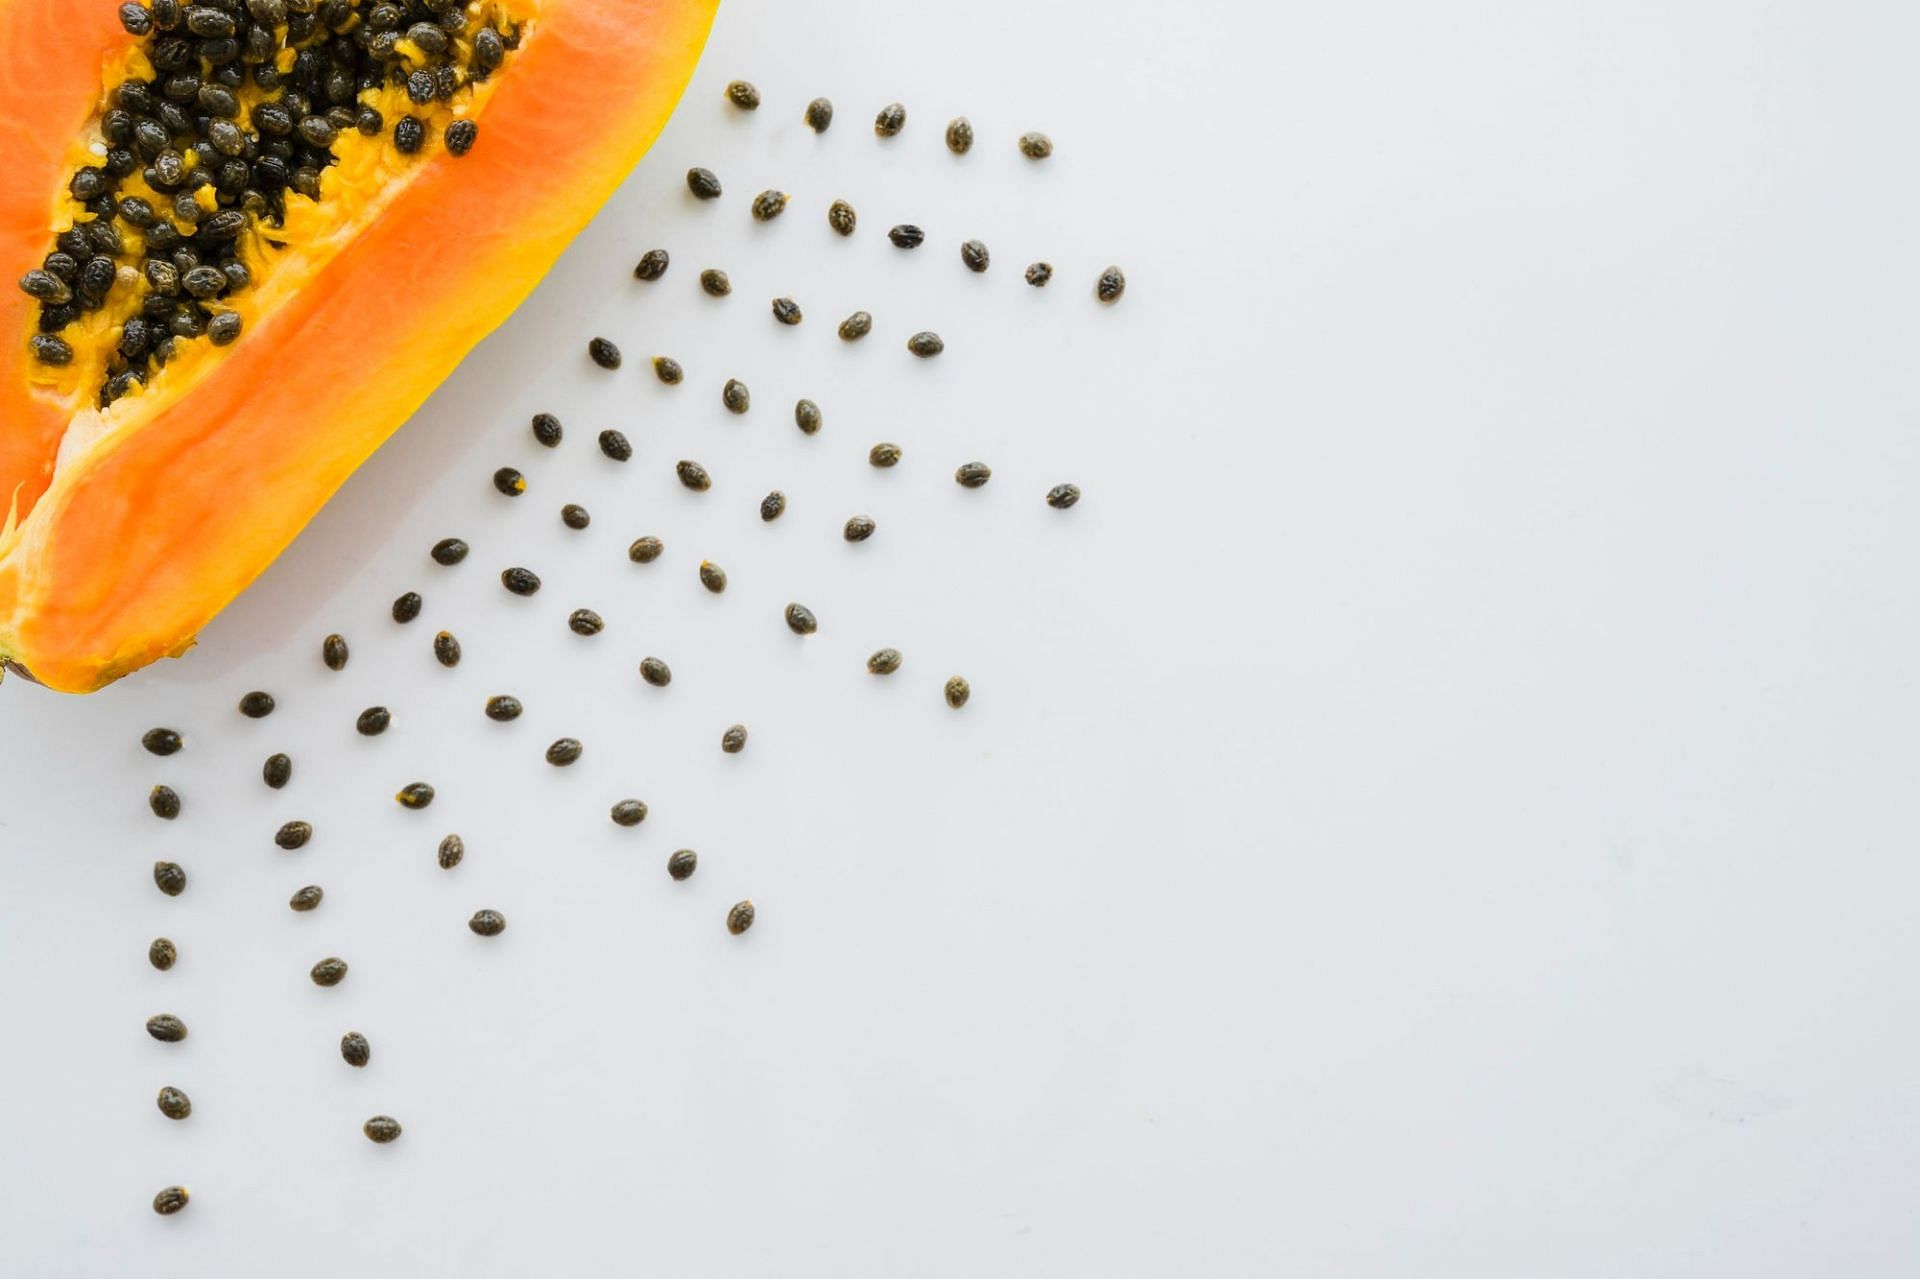 A paste of papaya seeds can be applied on the face to get skin benefits (Image by Freepik)